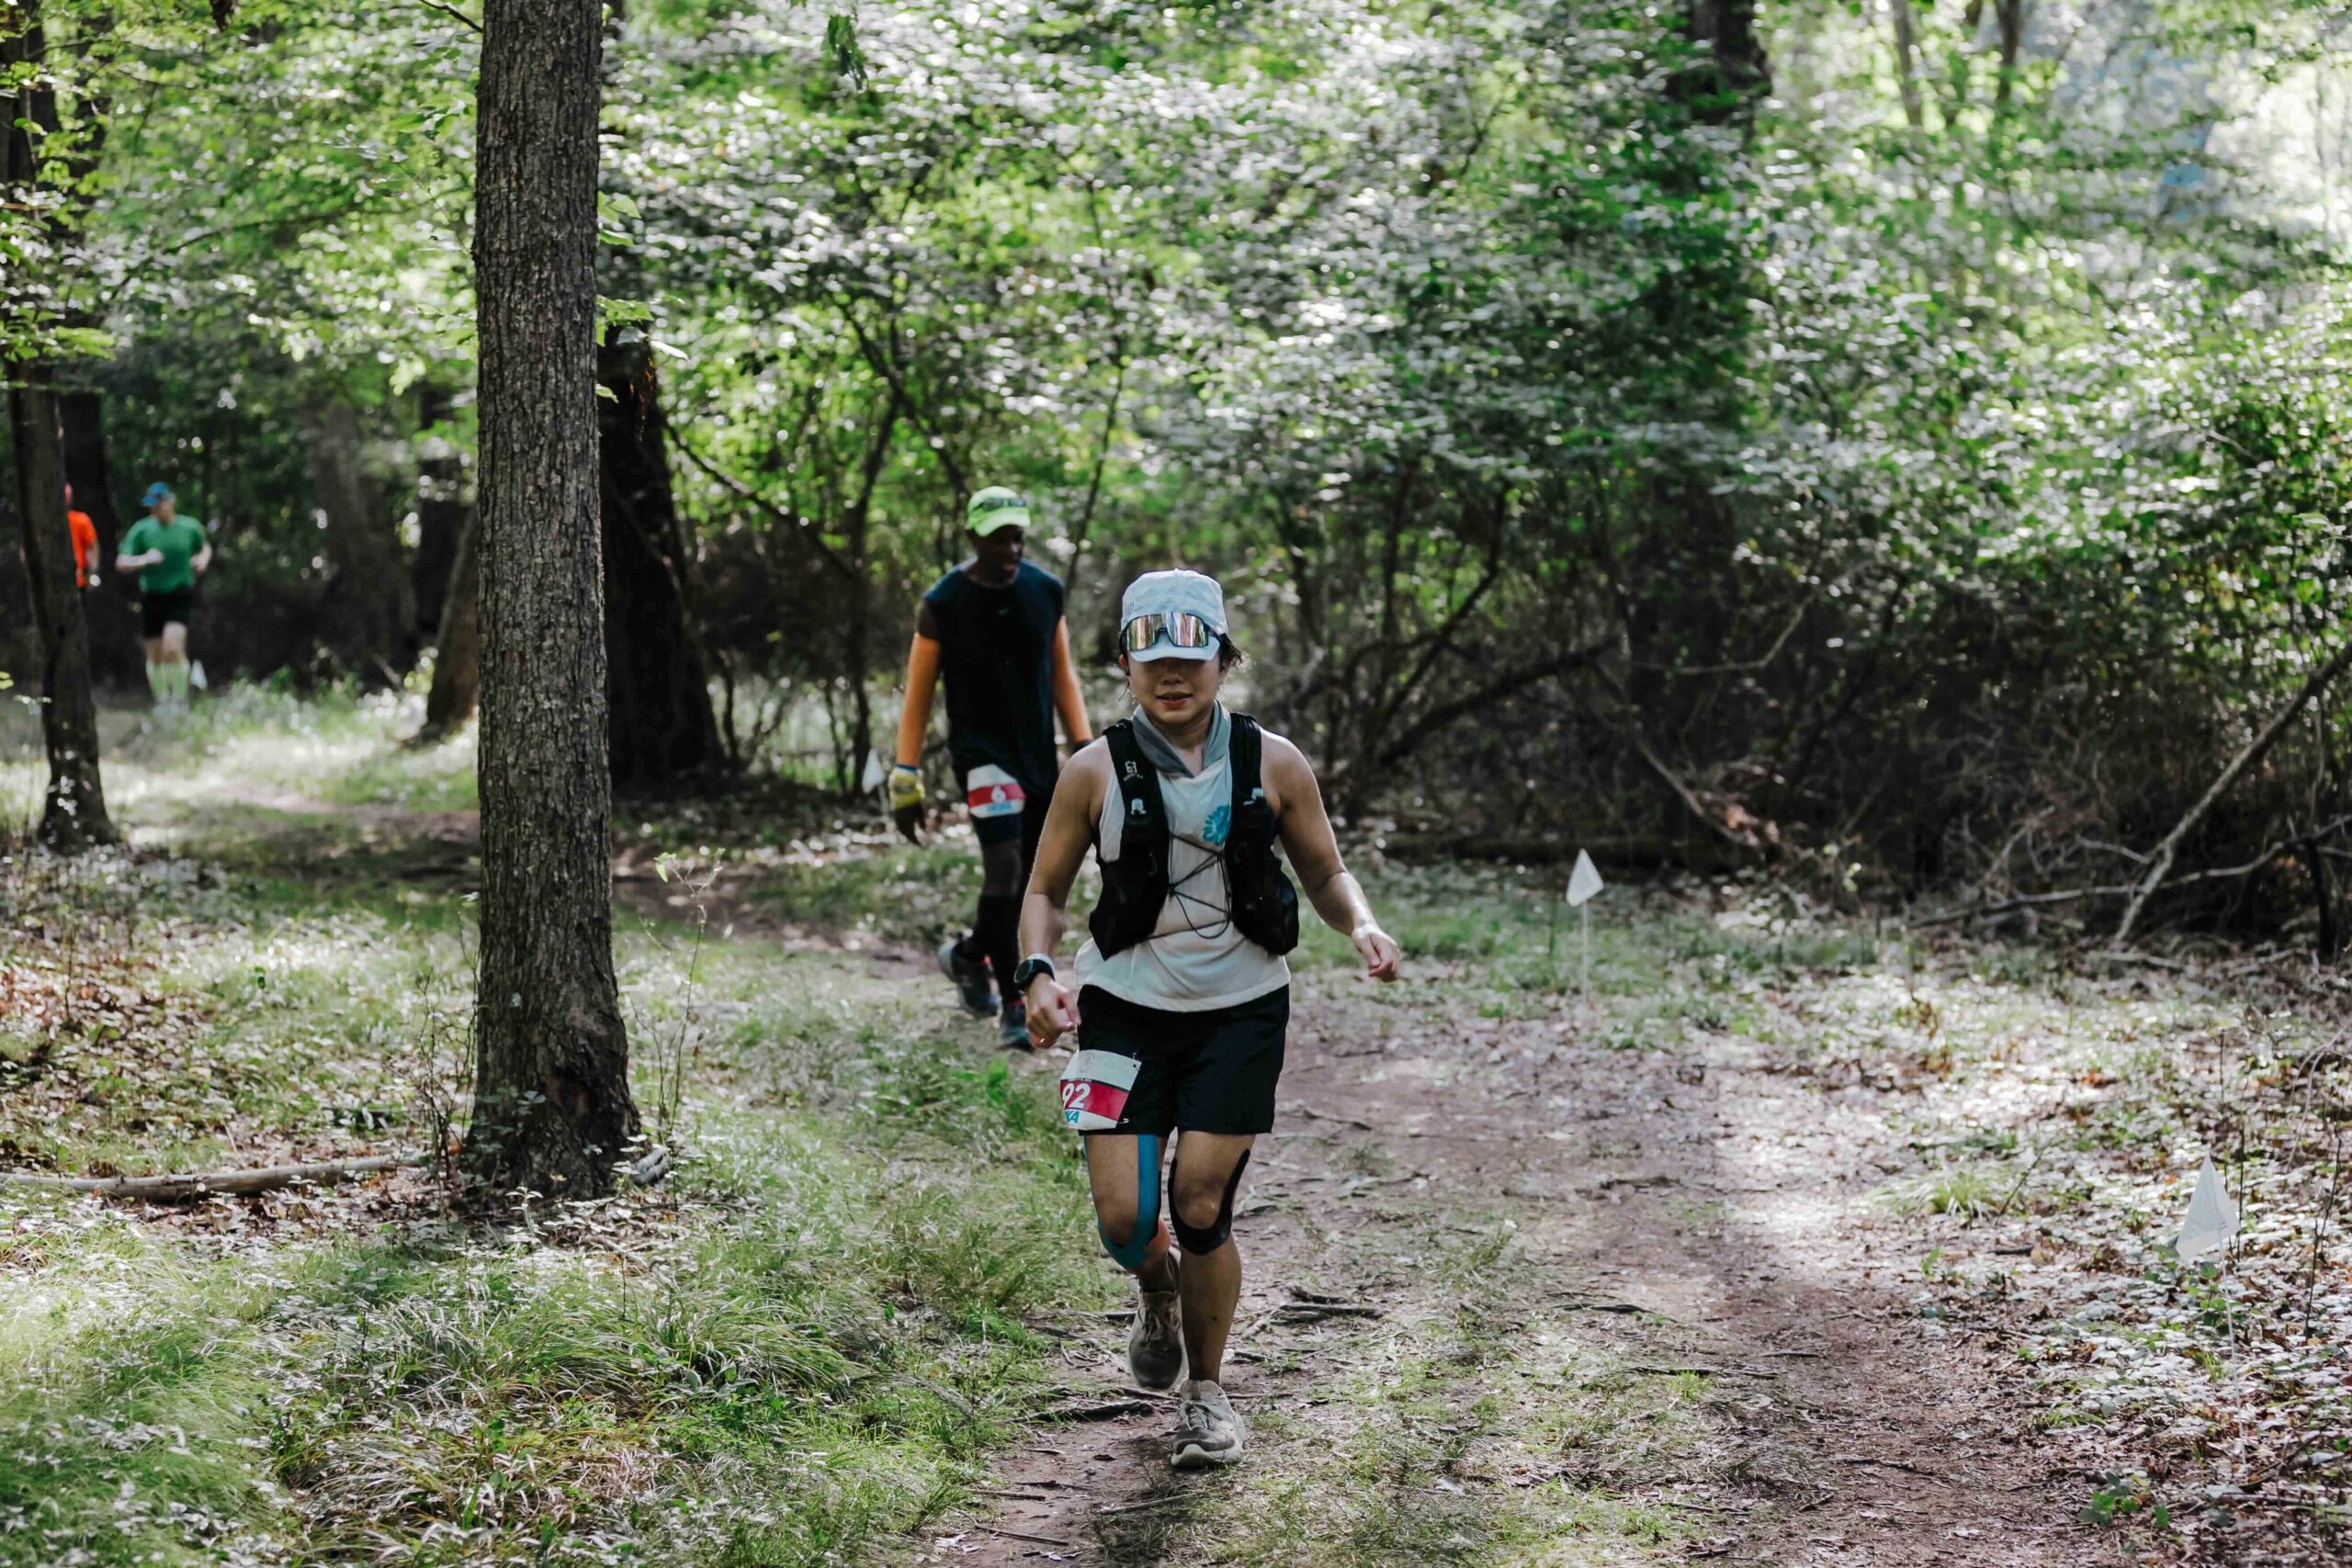 Runner navigating a wooded trail section of the Anchor Down Ultra Marathon course.